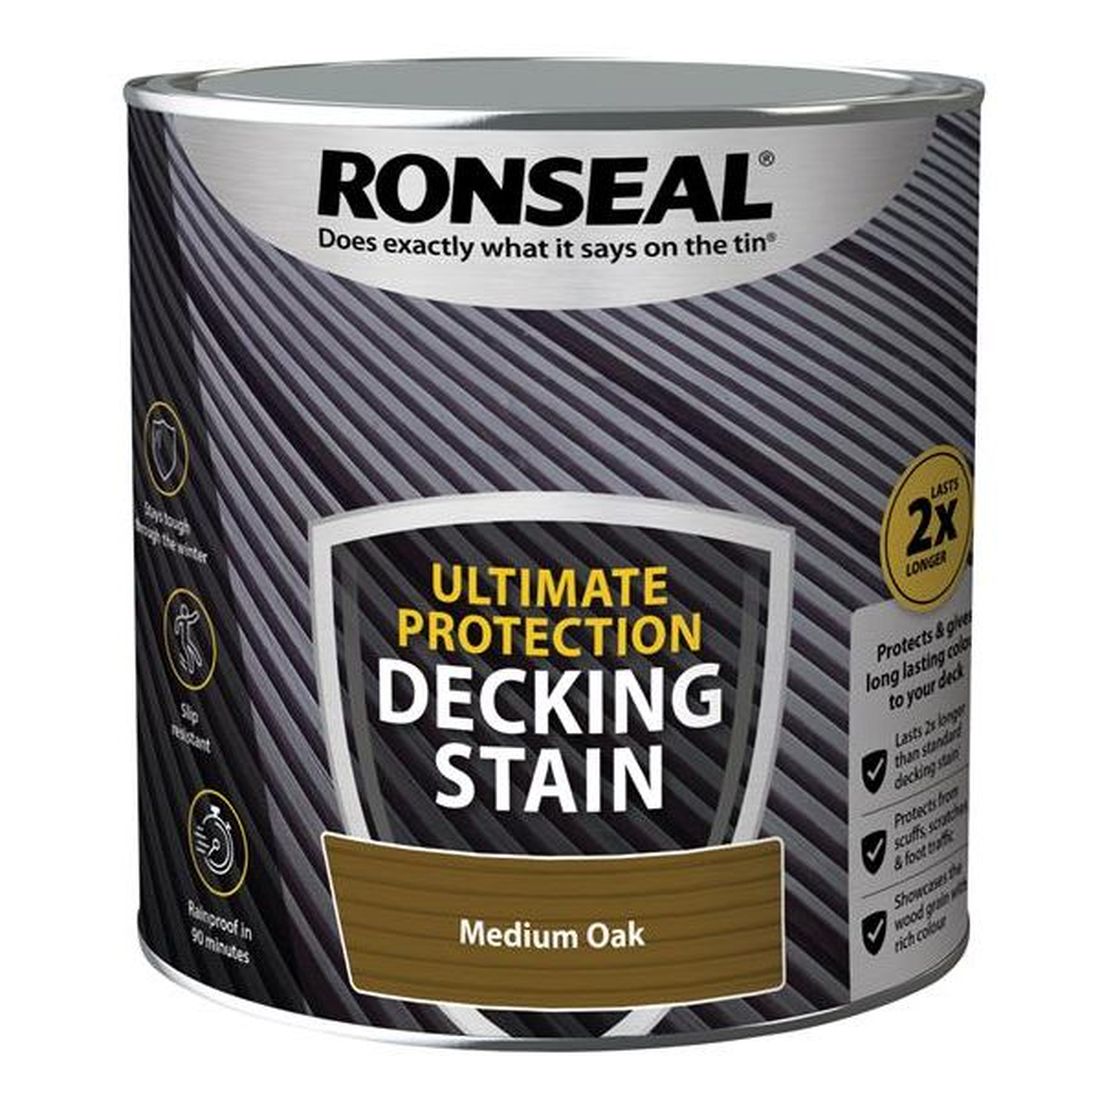 Ronseal Ultimate Protection Decking Stain Medium Oak 2.5 litre                          